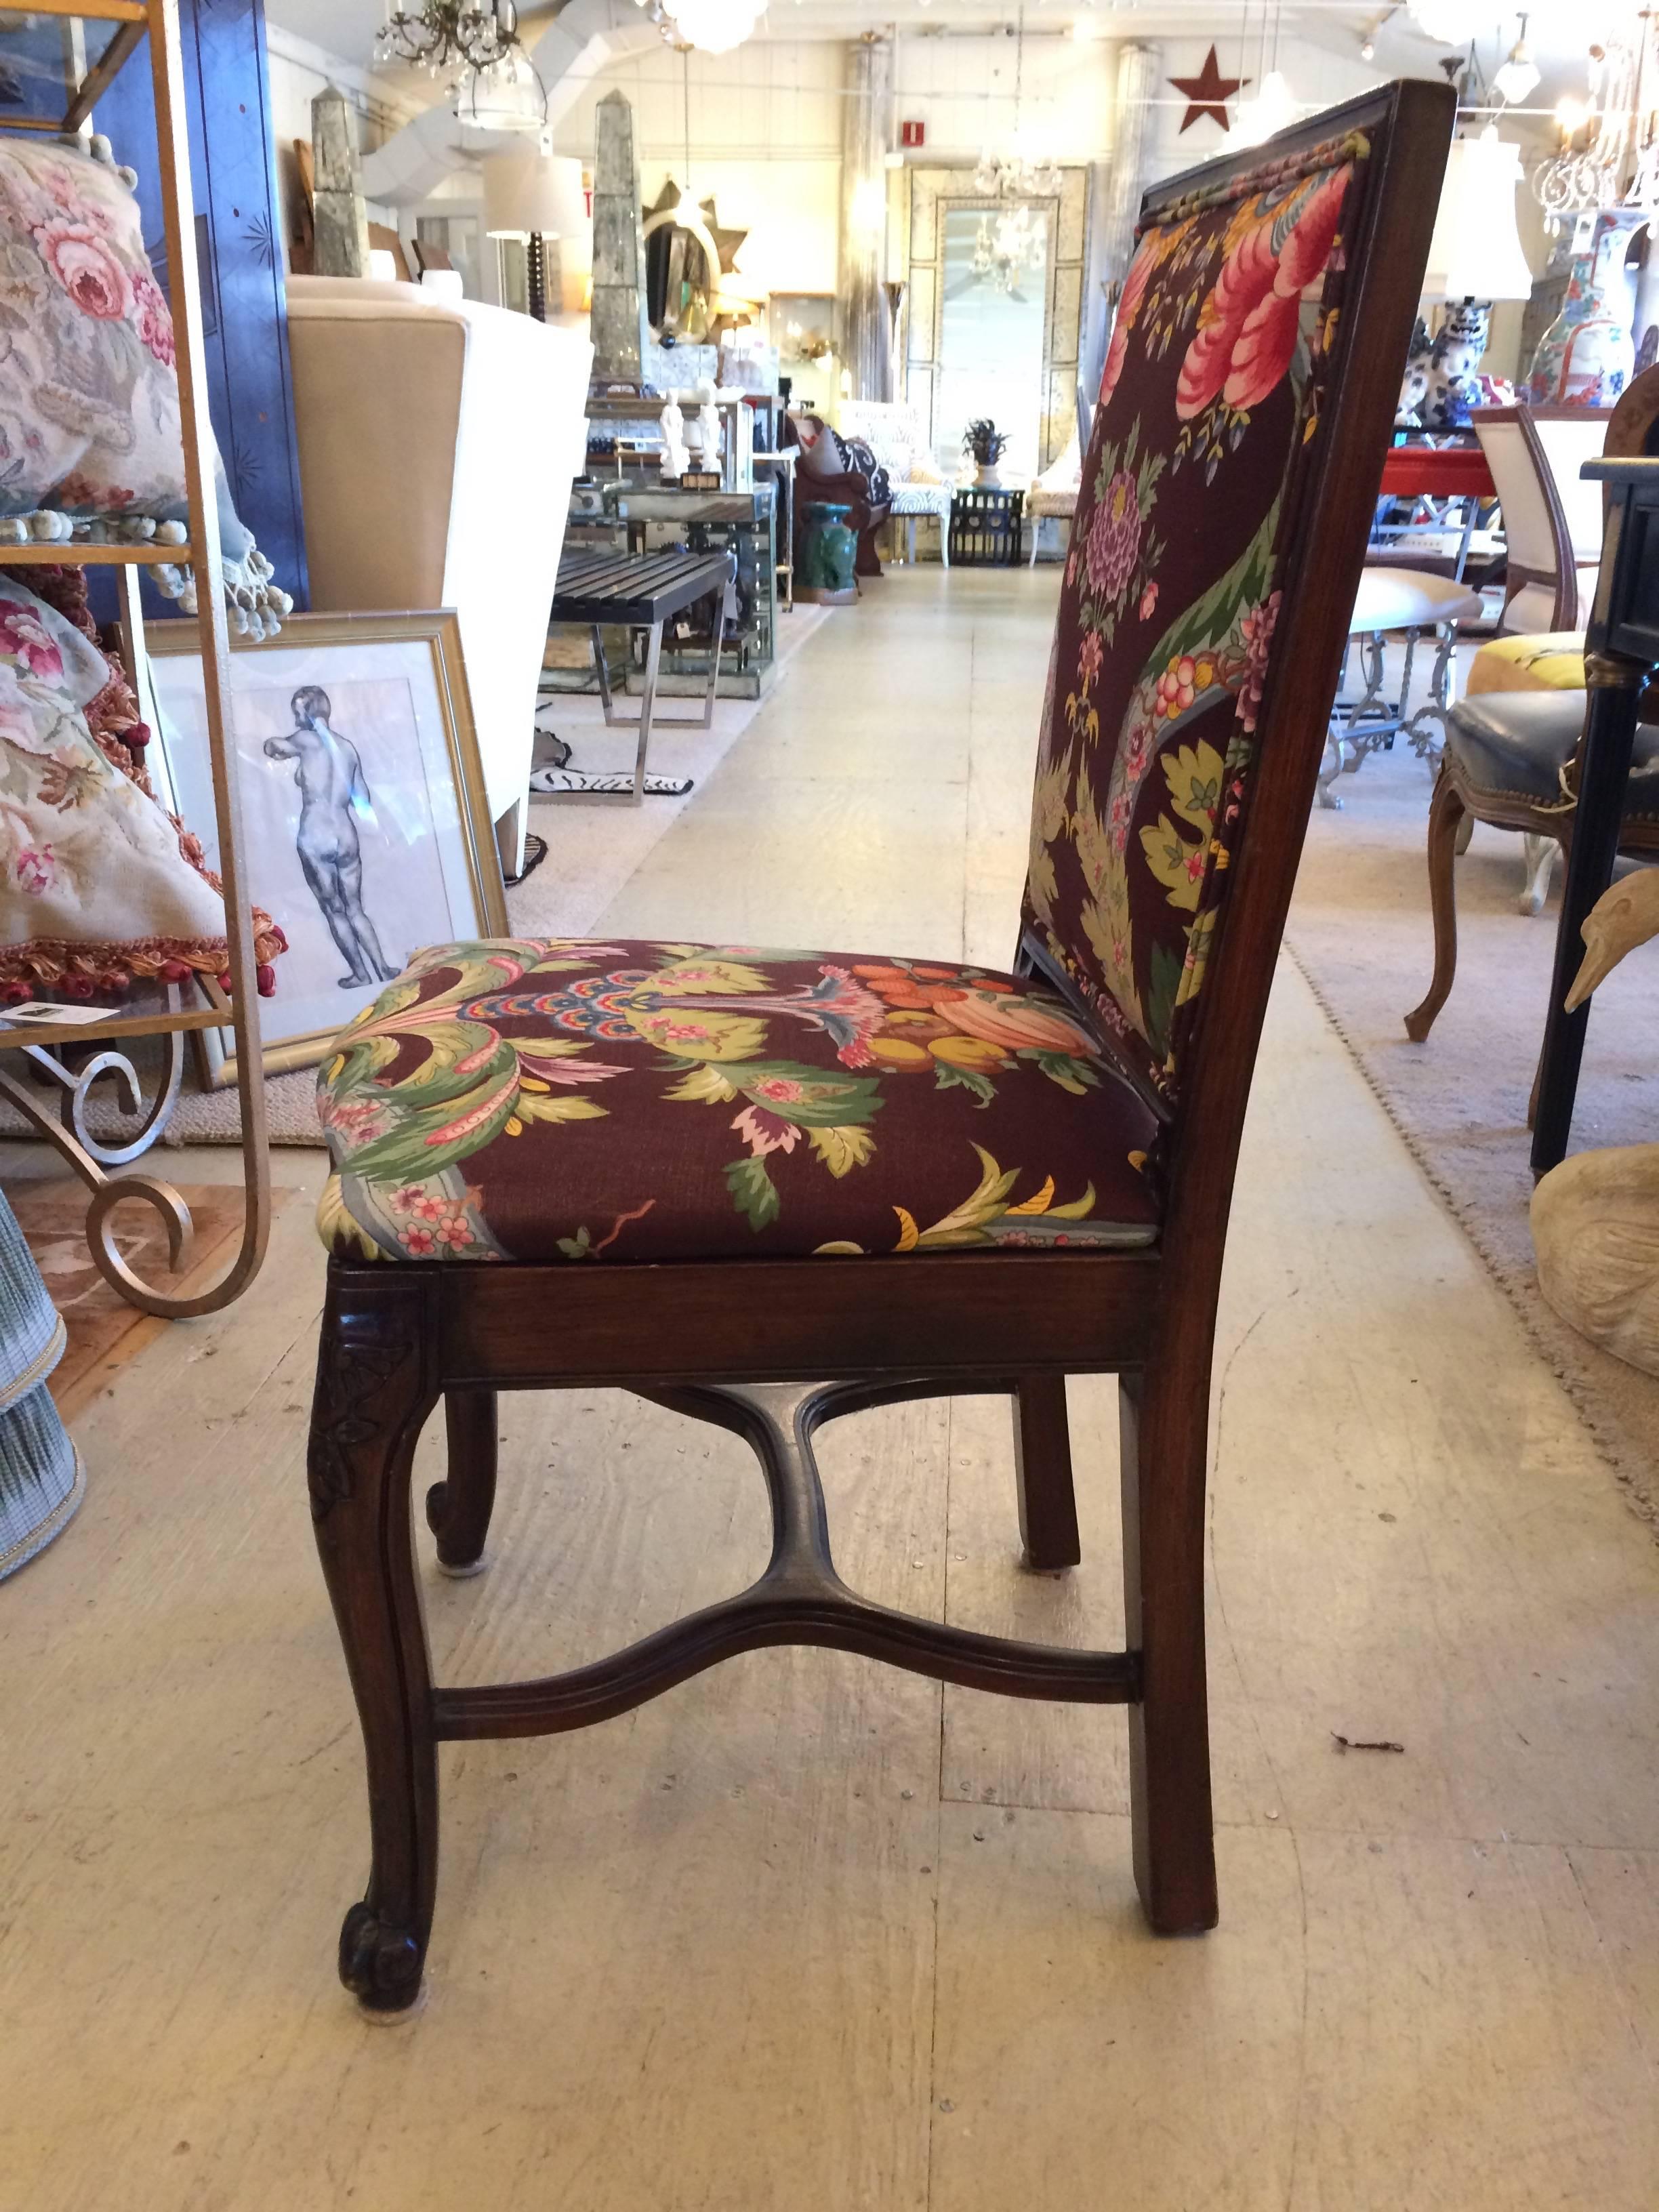 Wonderful French country carved mahogany dining chairs with old world charm, updated with zippy Brunschwig and fils upholstery.